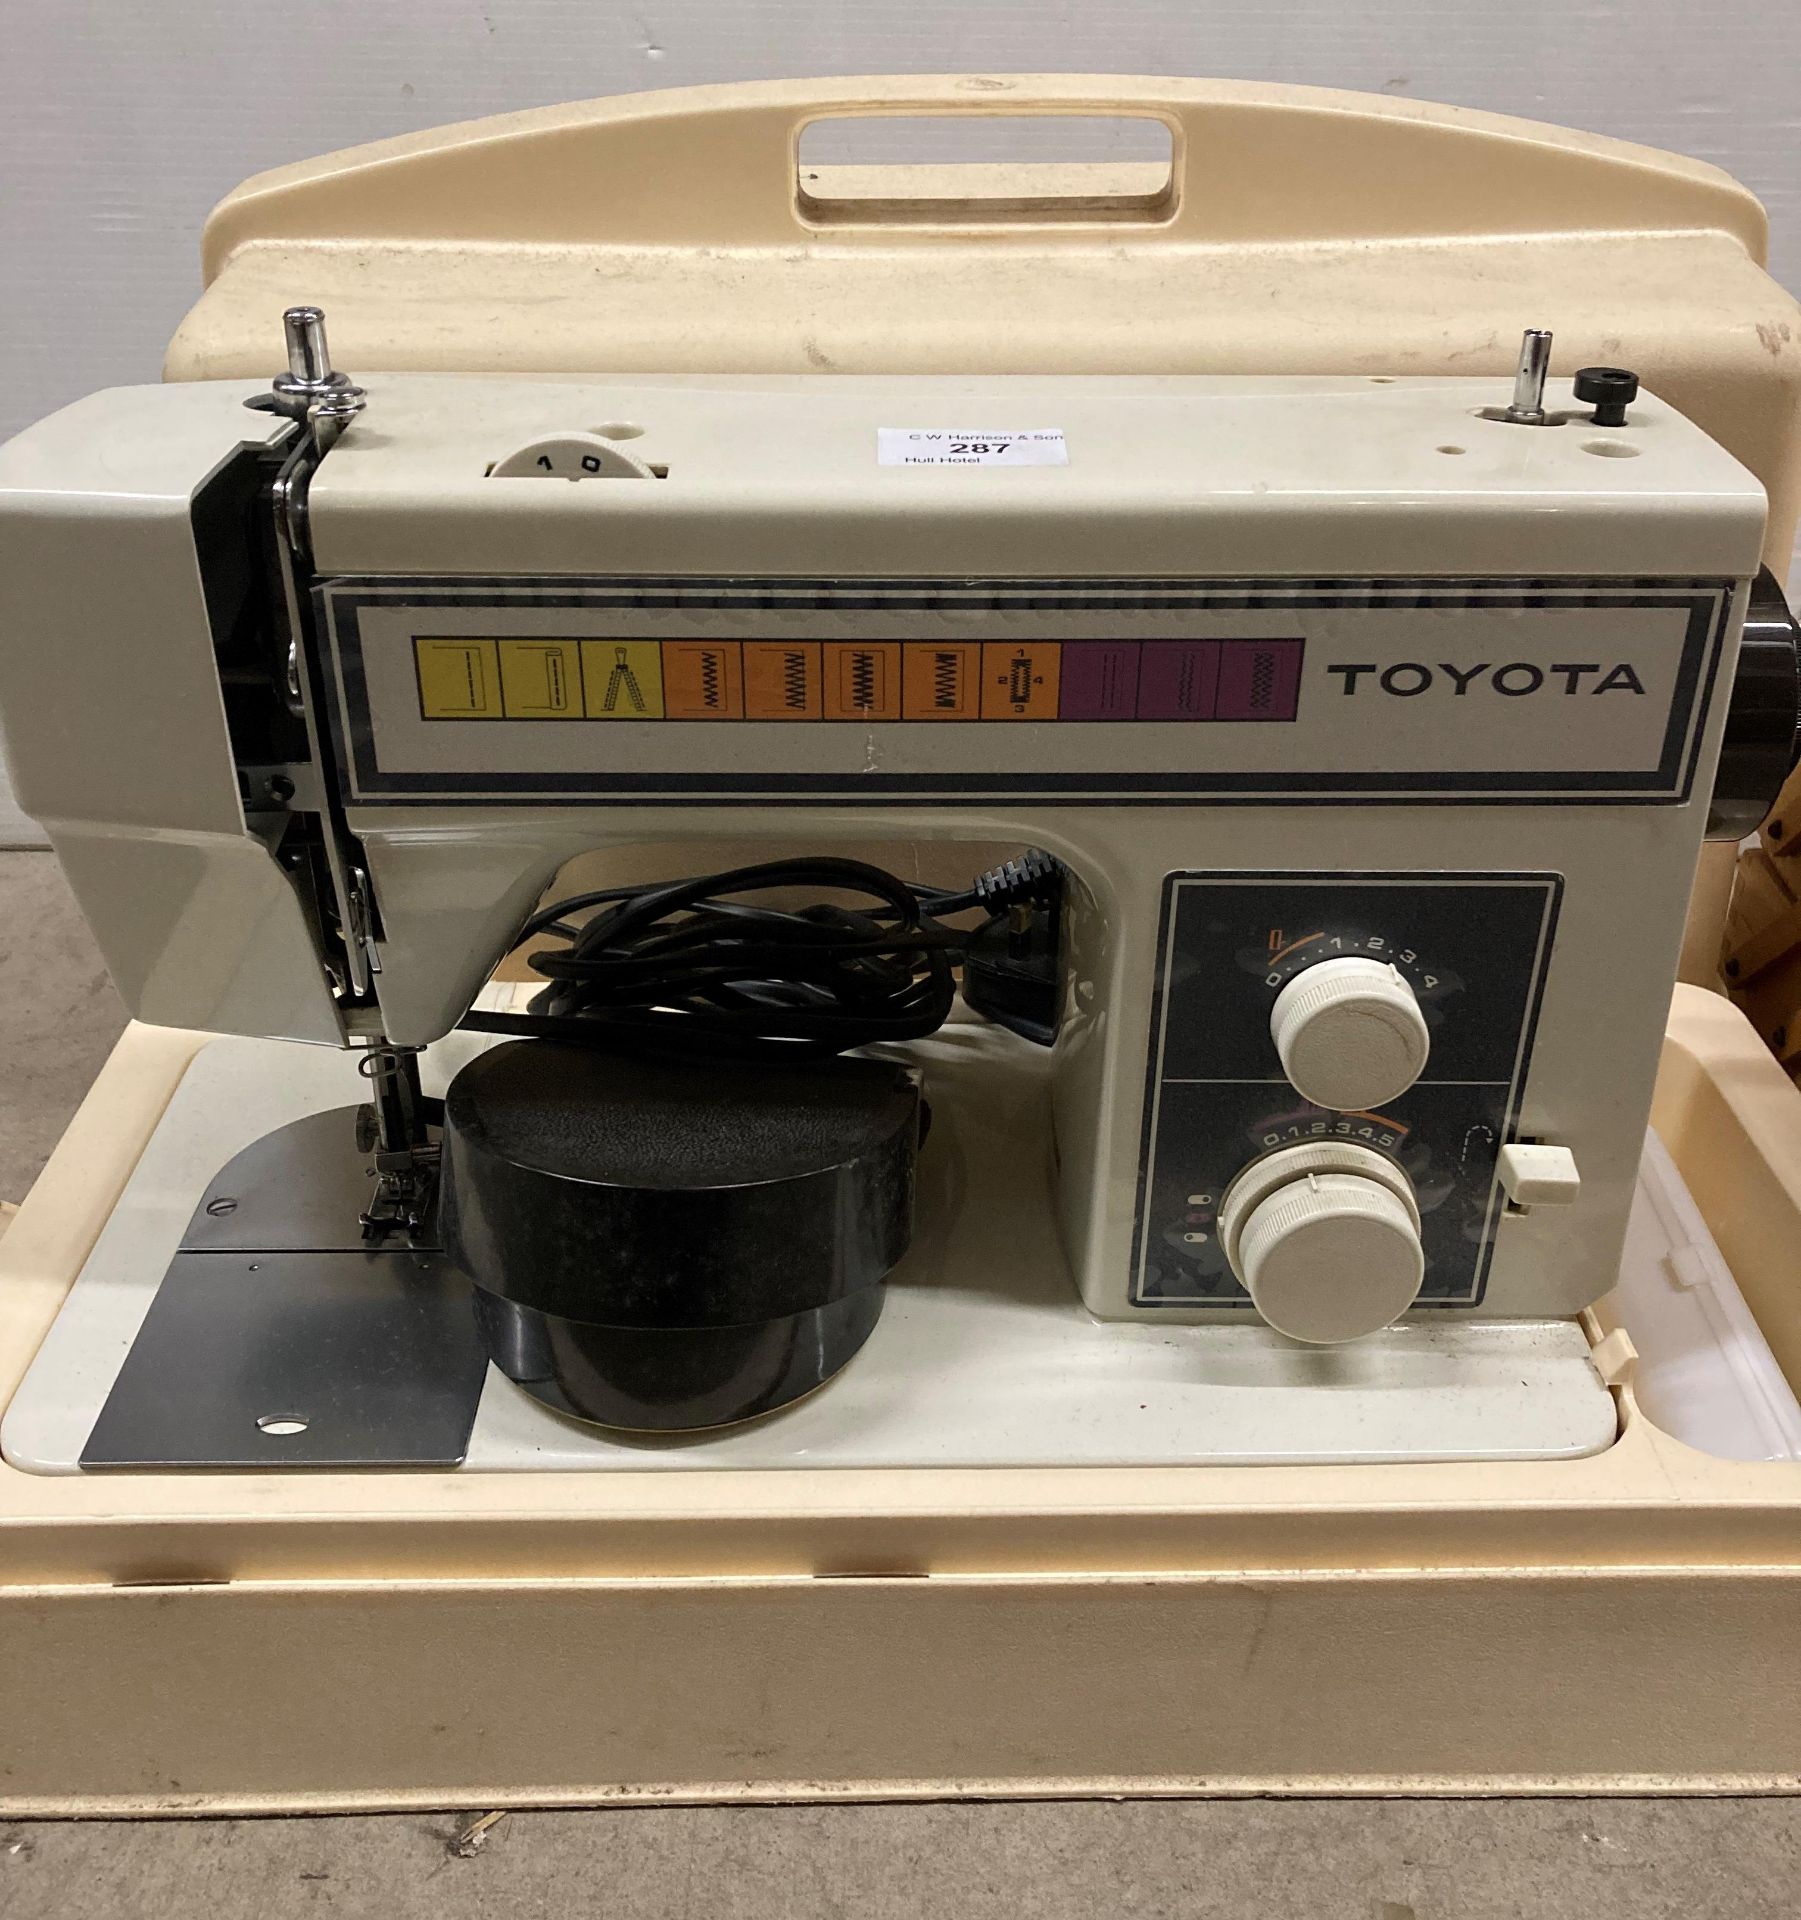 Toyota electric foot-operated sewing machine in carrying case - model: 222 - and a wooden - Image 2 of 3